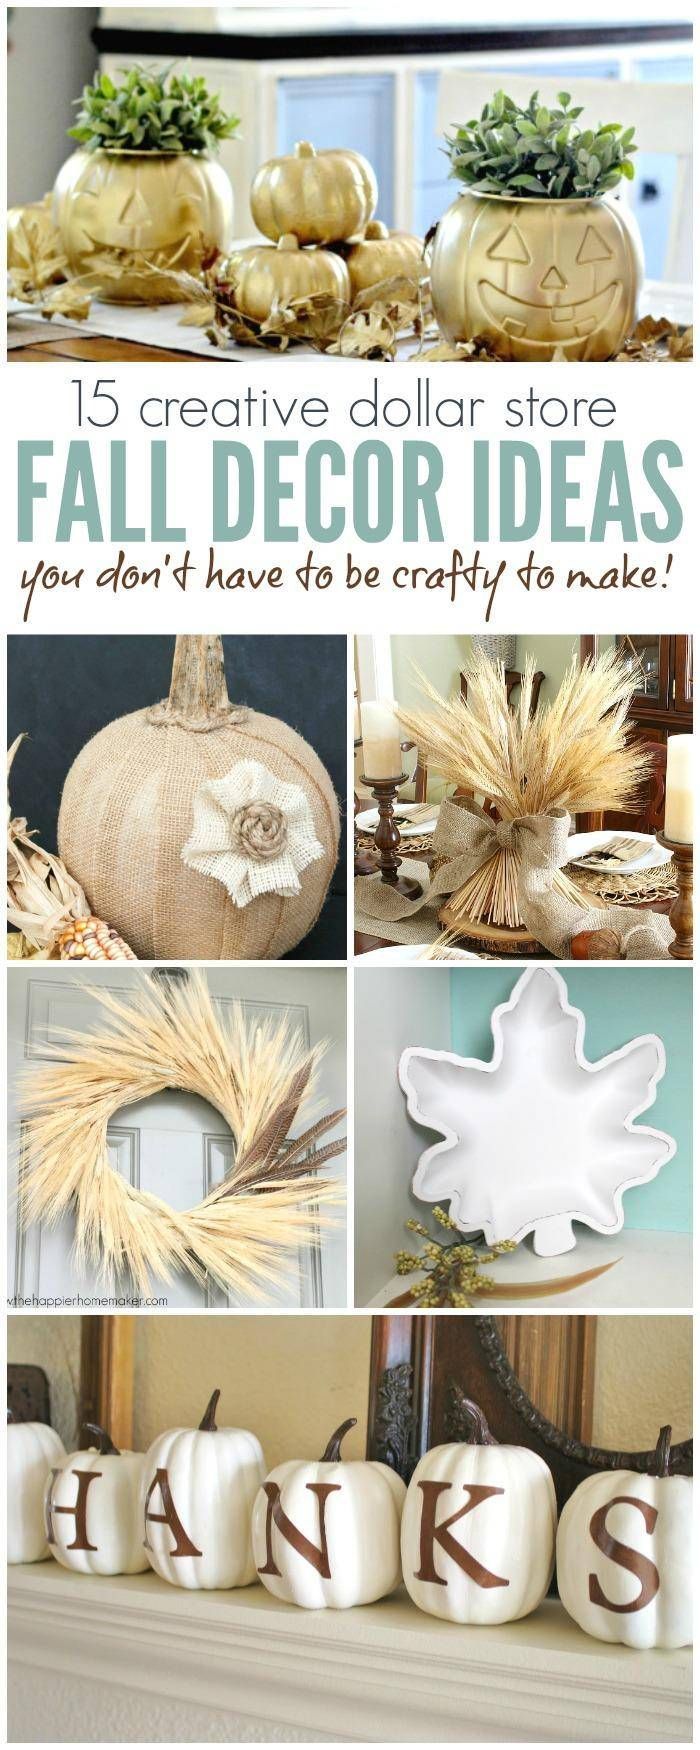 30 Creative Dollar Store Fall Decor Ideas Anyone Can Make - Passion For Savings -   18 thanksgiving decorations for home dollar stores ideas